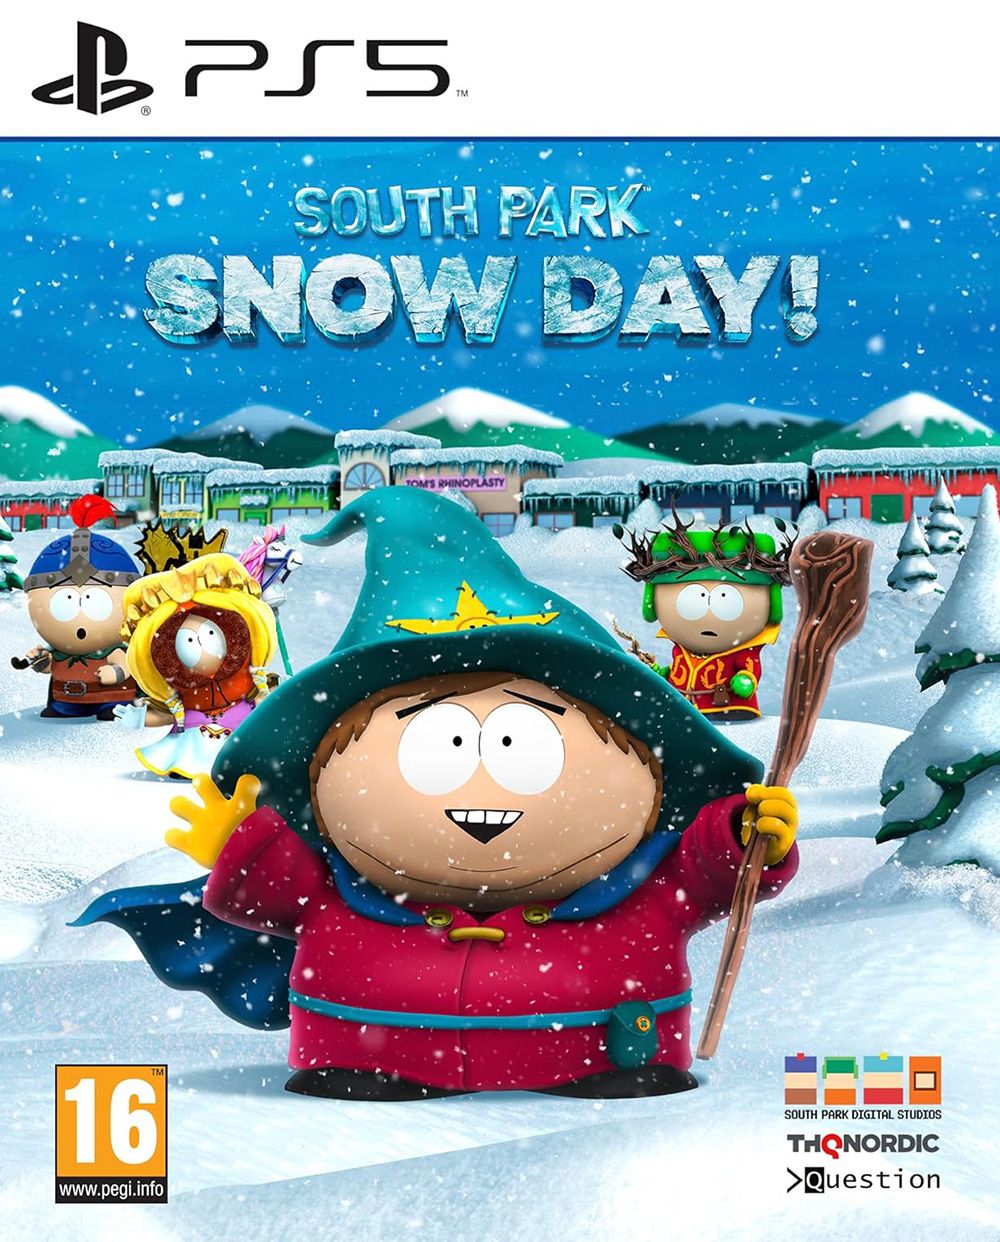 South Park: Snow Day! (PS5) | PlayStation 5